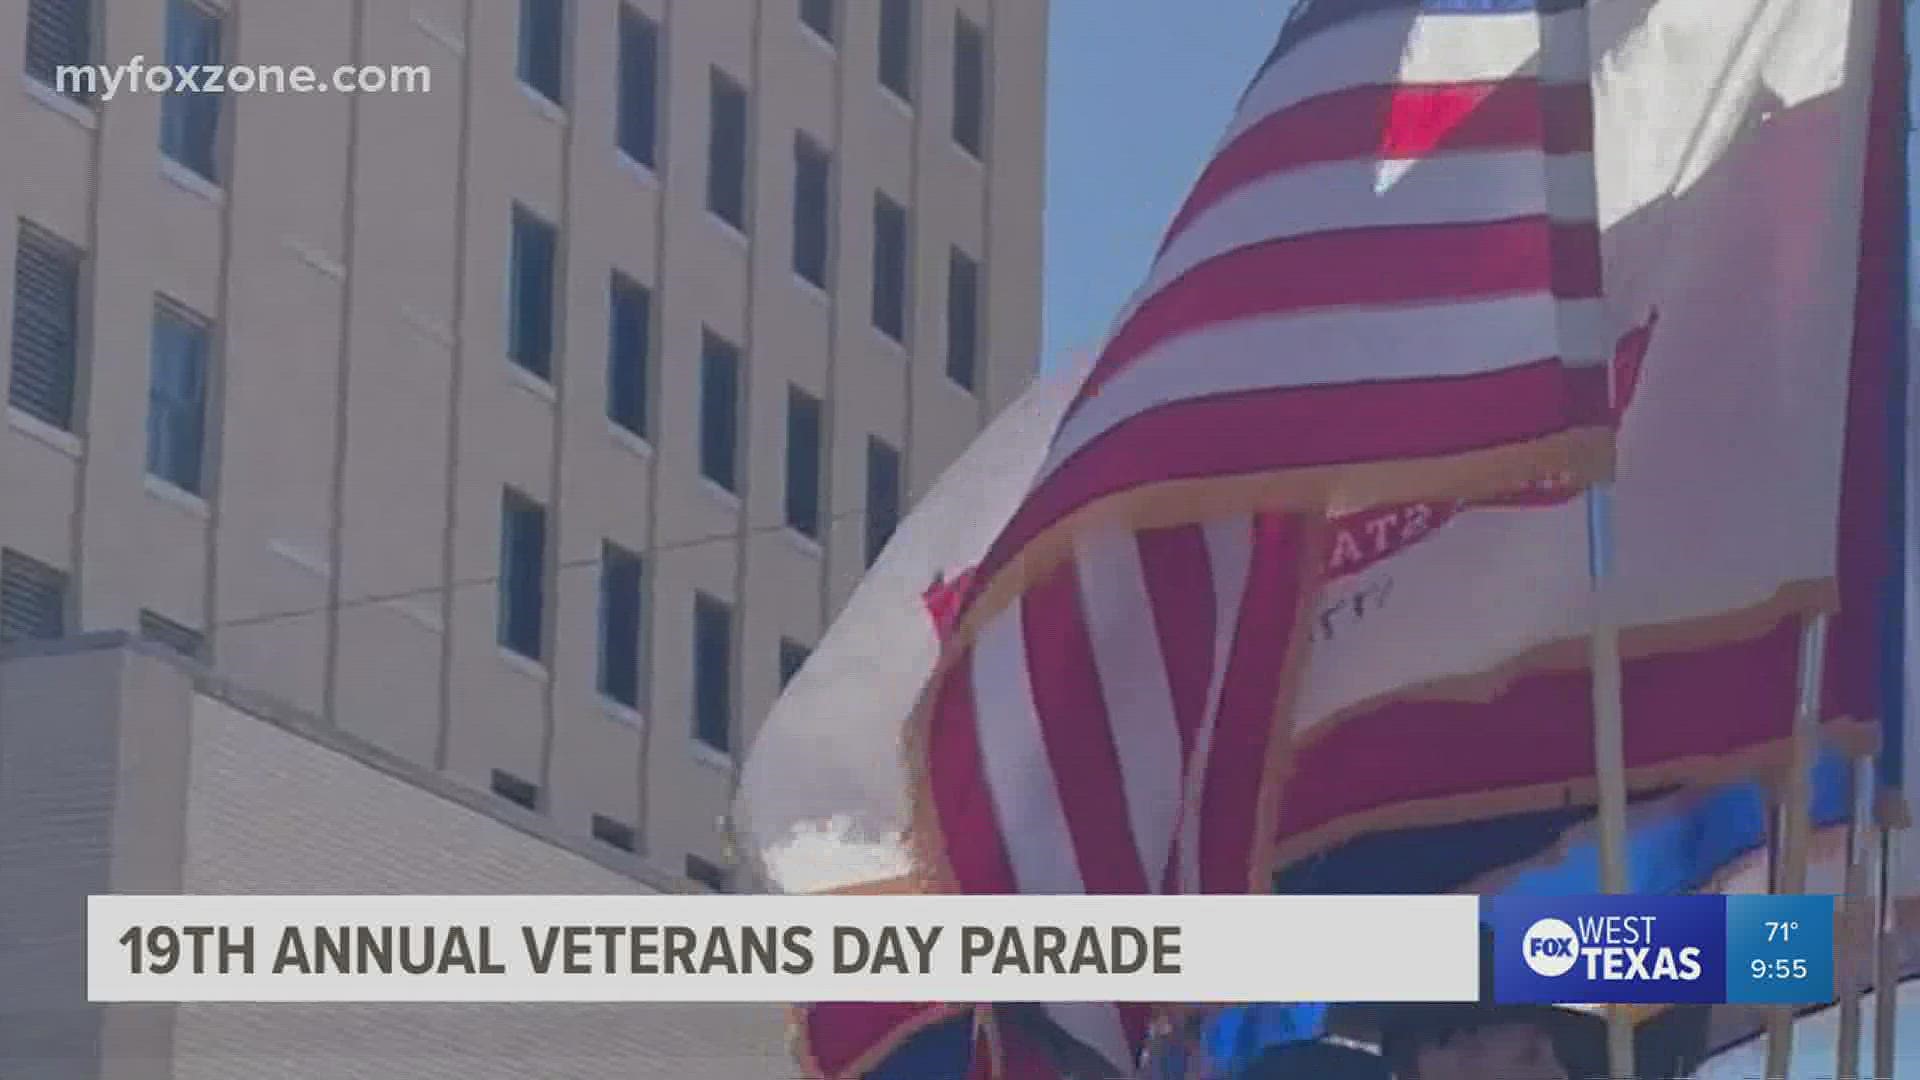 The parade is set for 11 a.m. Saturday, Nov. 5 in downtown San Angelo.